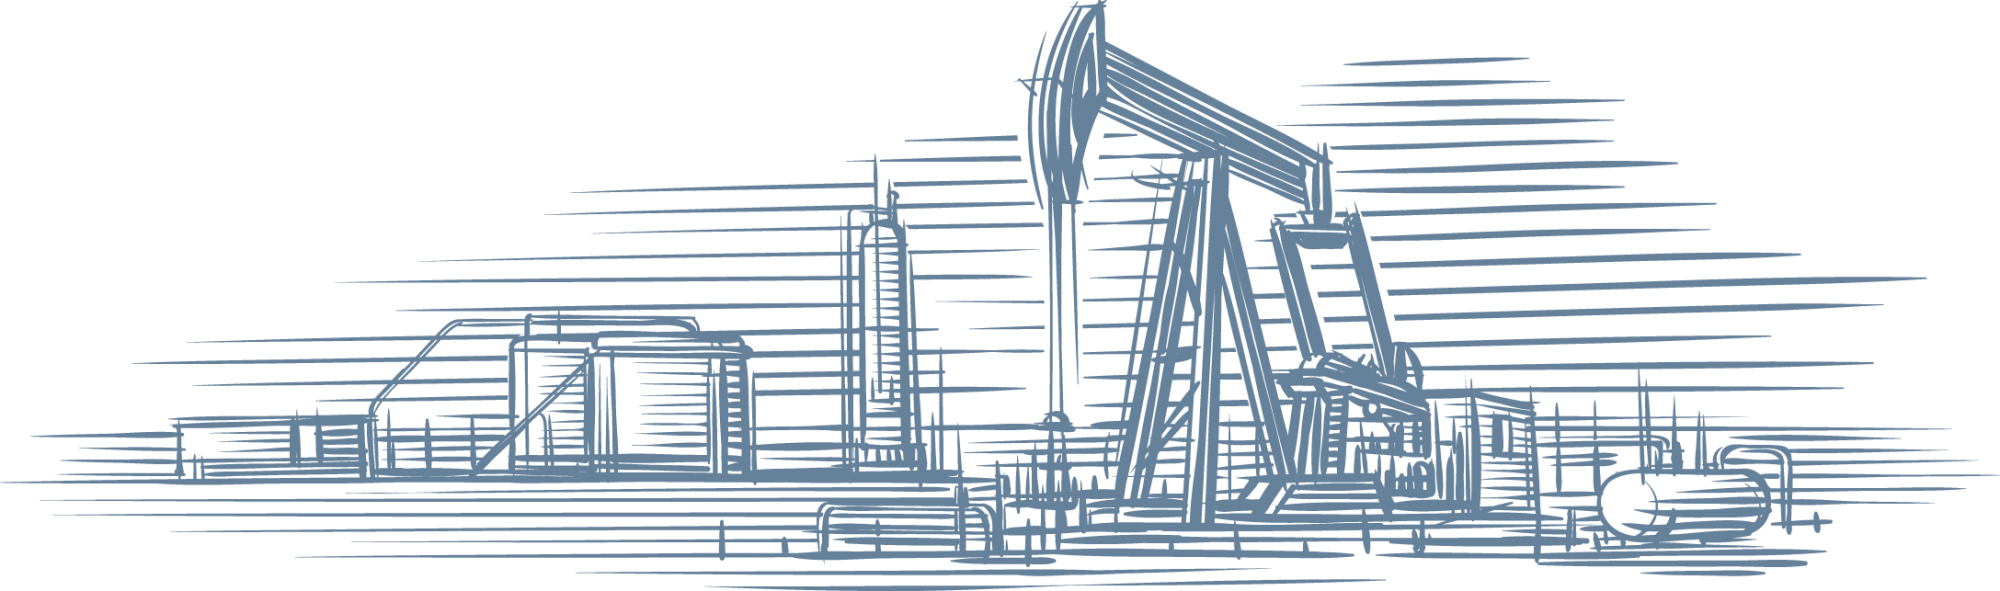 Illustration of a pump jack and well site.